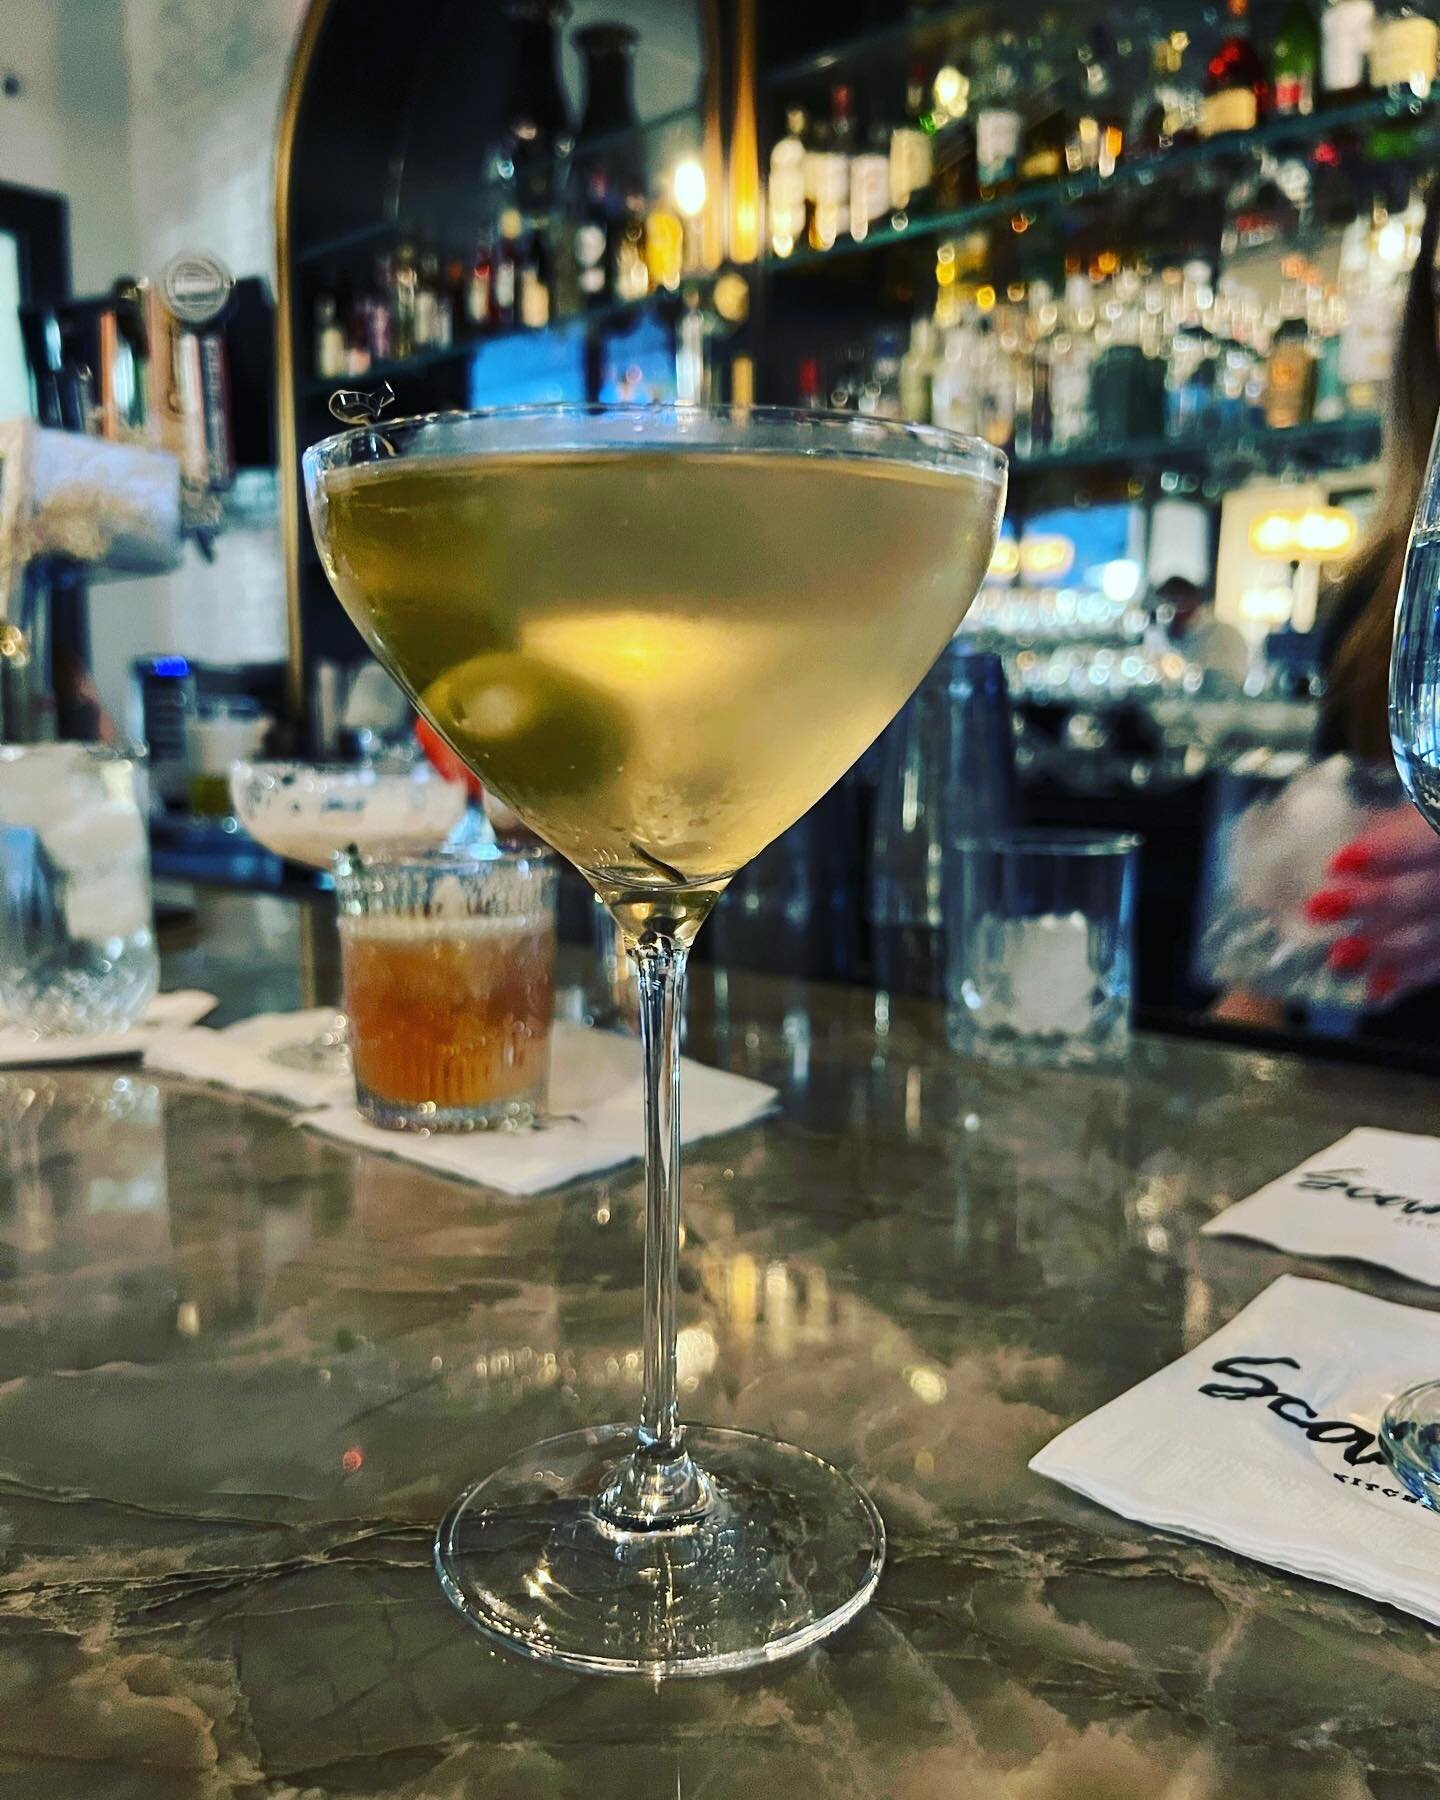 Throwback Thursday Happy Hour 🍸 $4 off Martinis + some JAMES RIVER OYSTERS for 1/2 off 😋 

#happyhour #welldrinks #craftcocktails #specials #bites #appetizers #burger #senderomarketplace